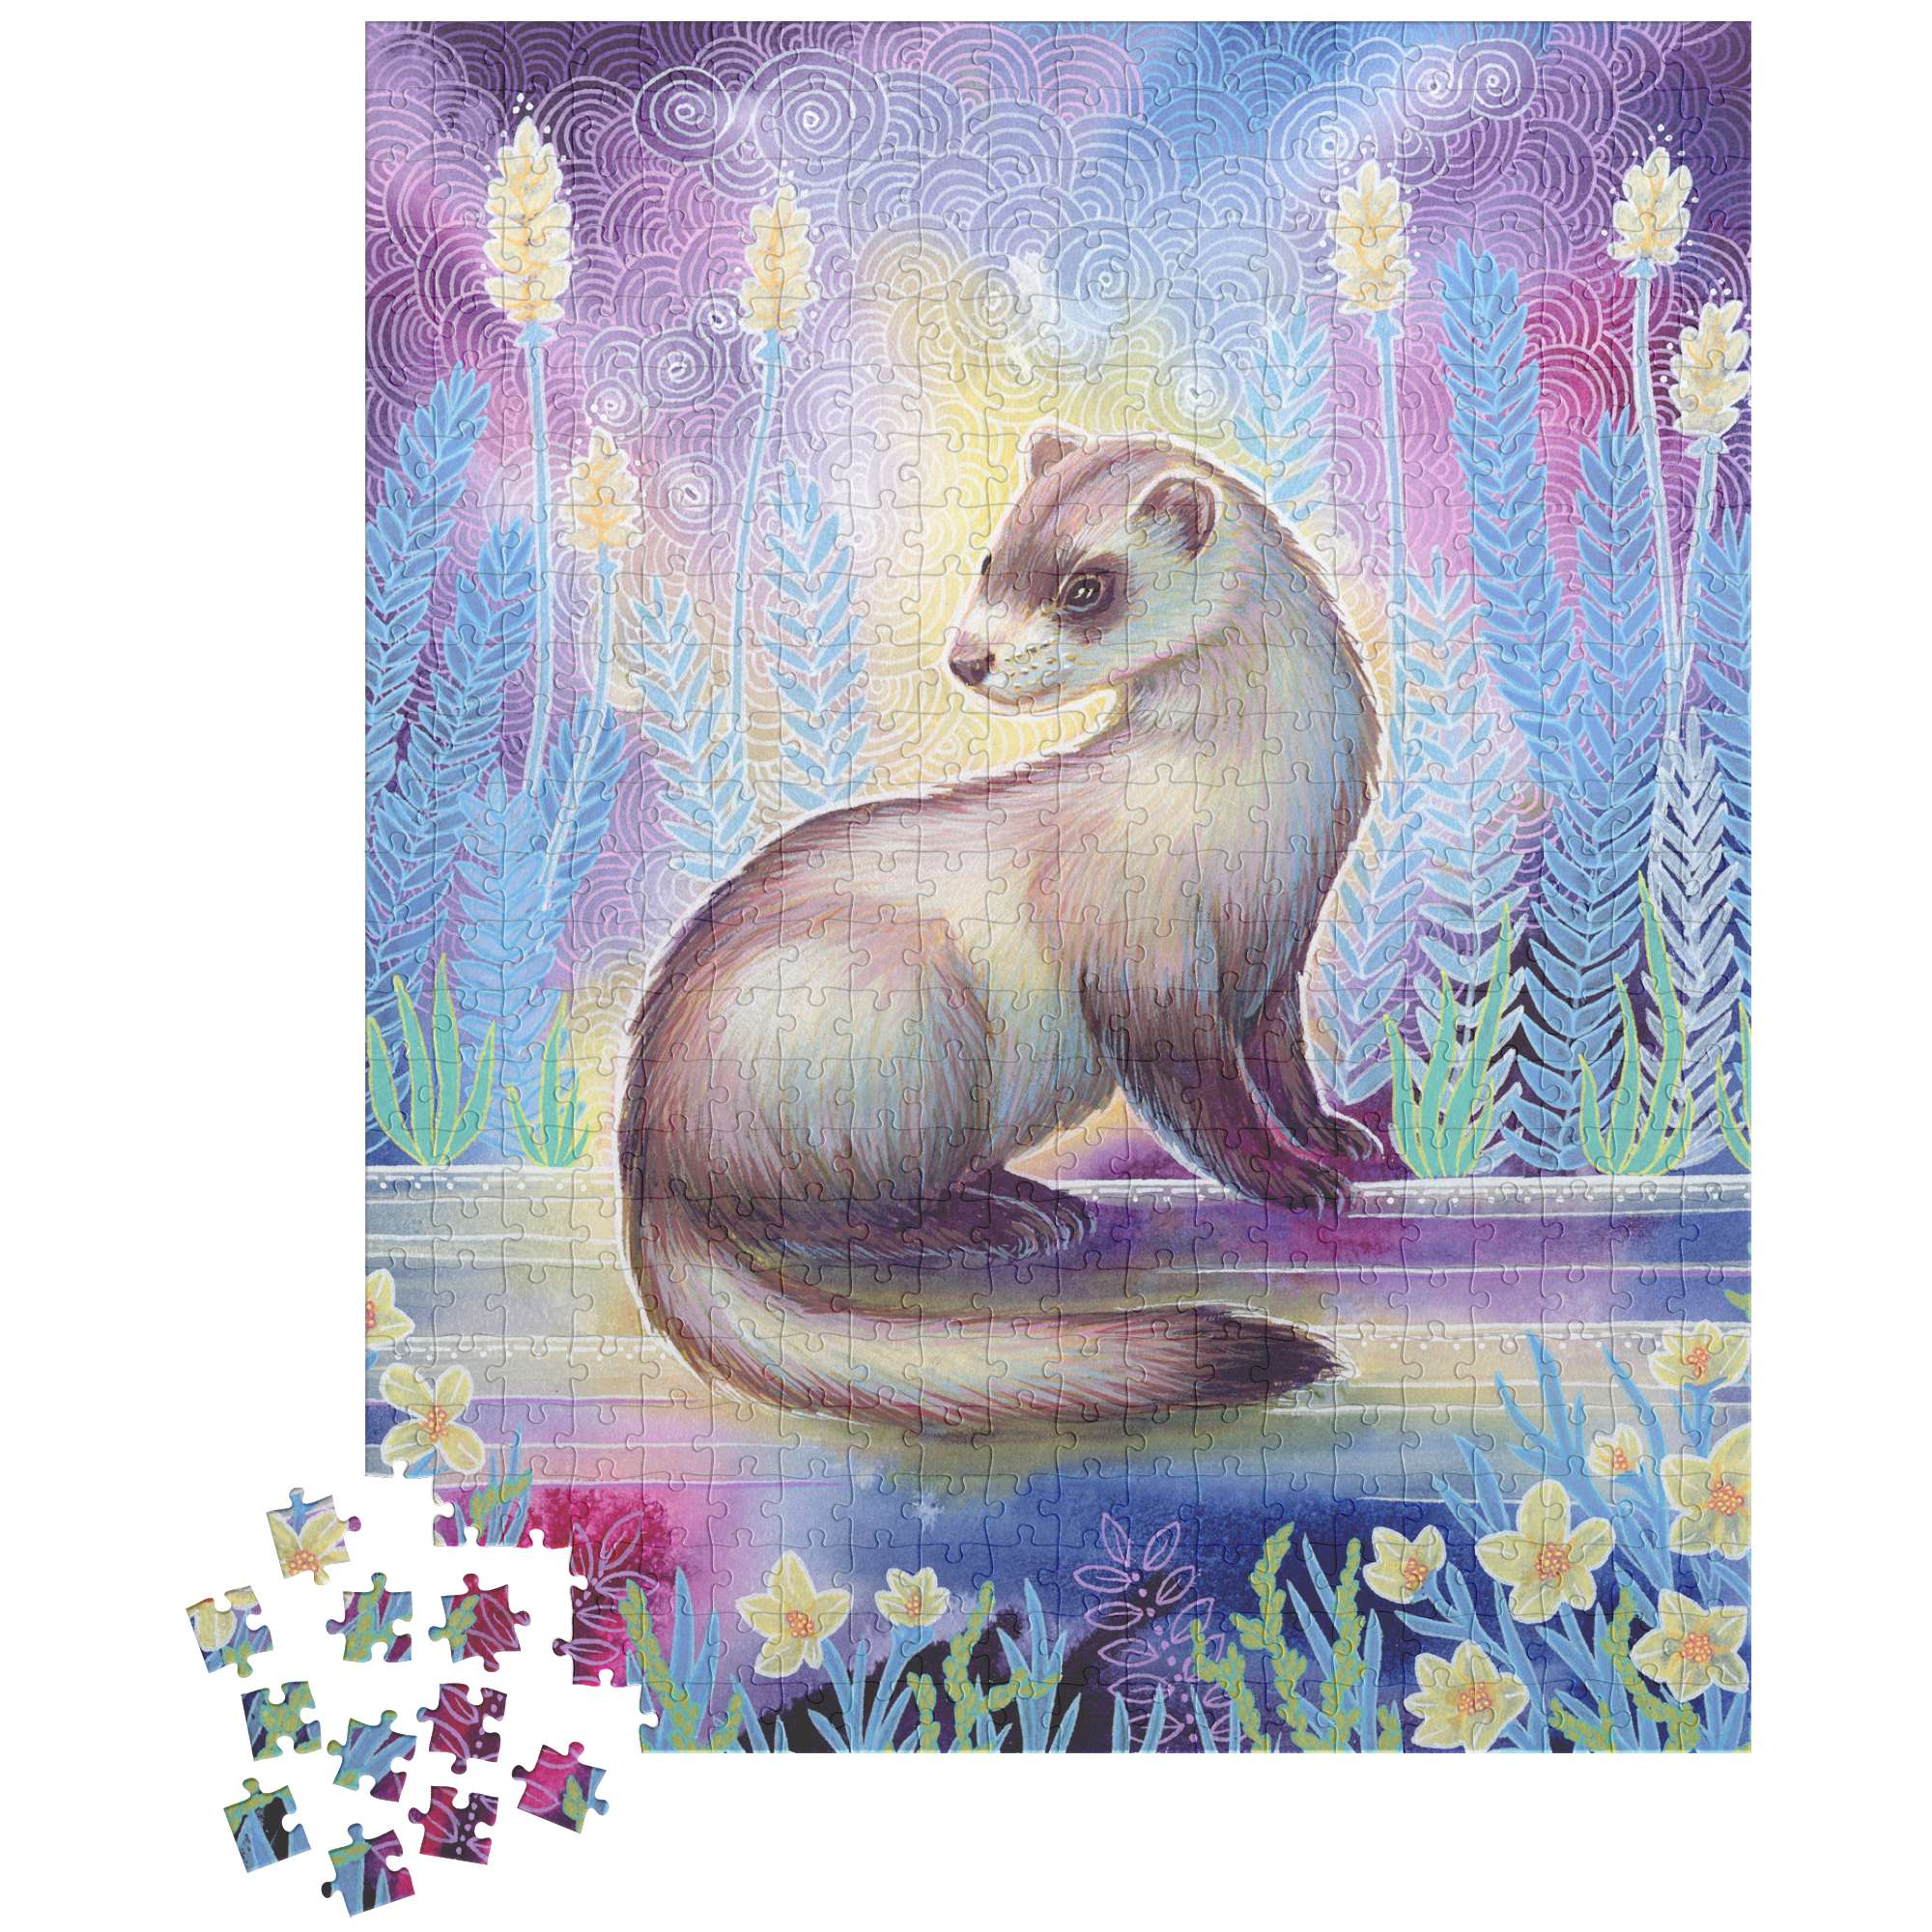 Illustration of a ferret on a colorful, patterned background, depicted in a puzzle form with some pieces detached.